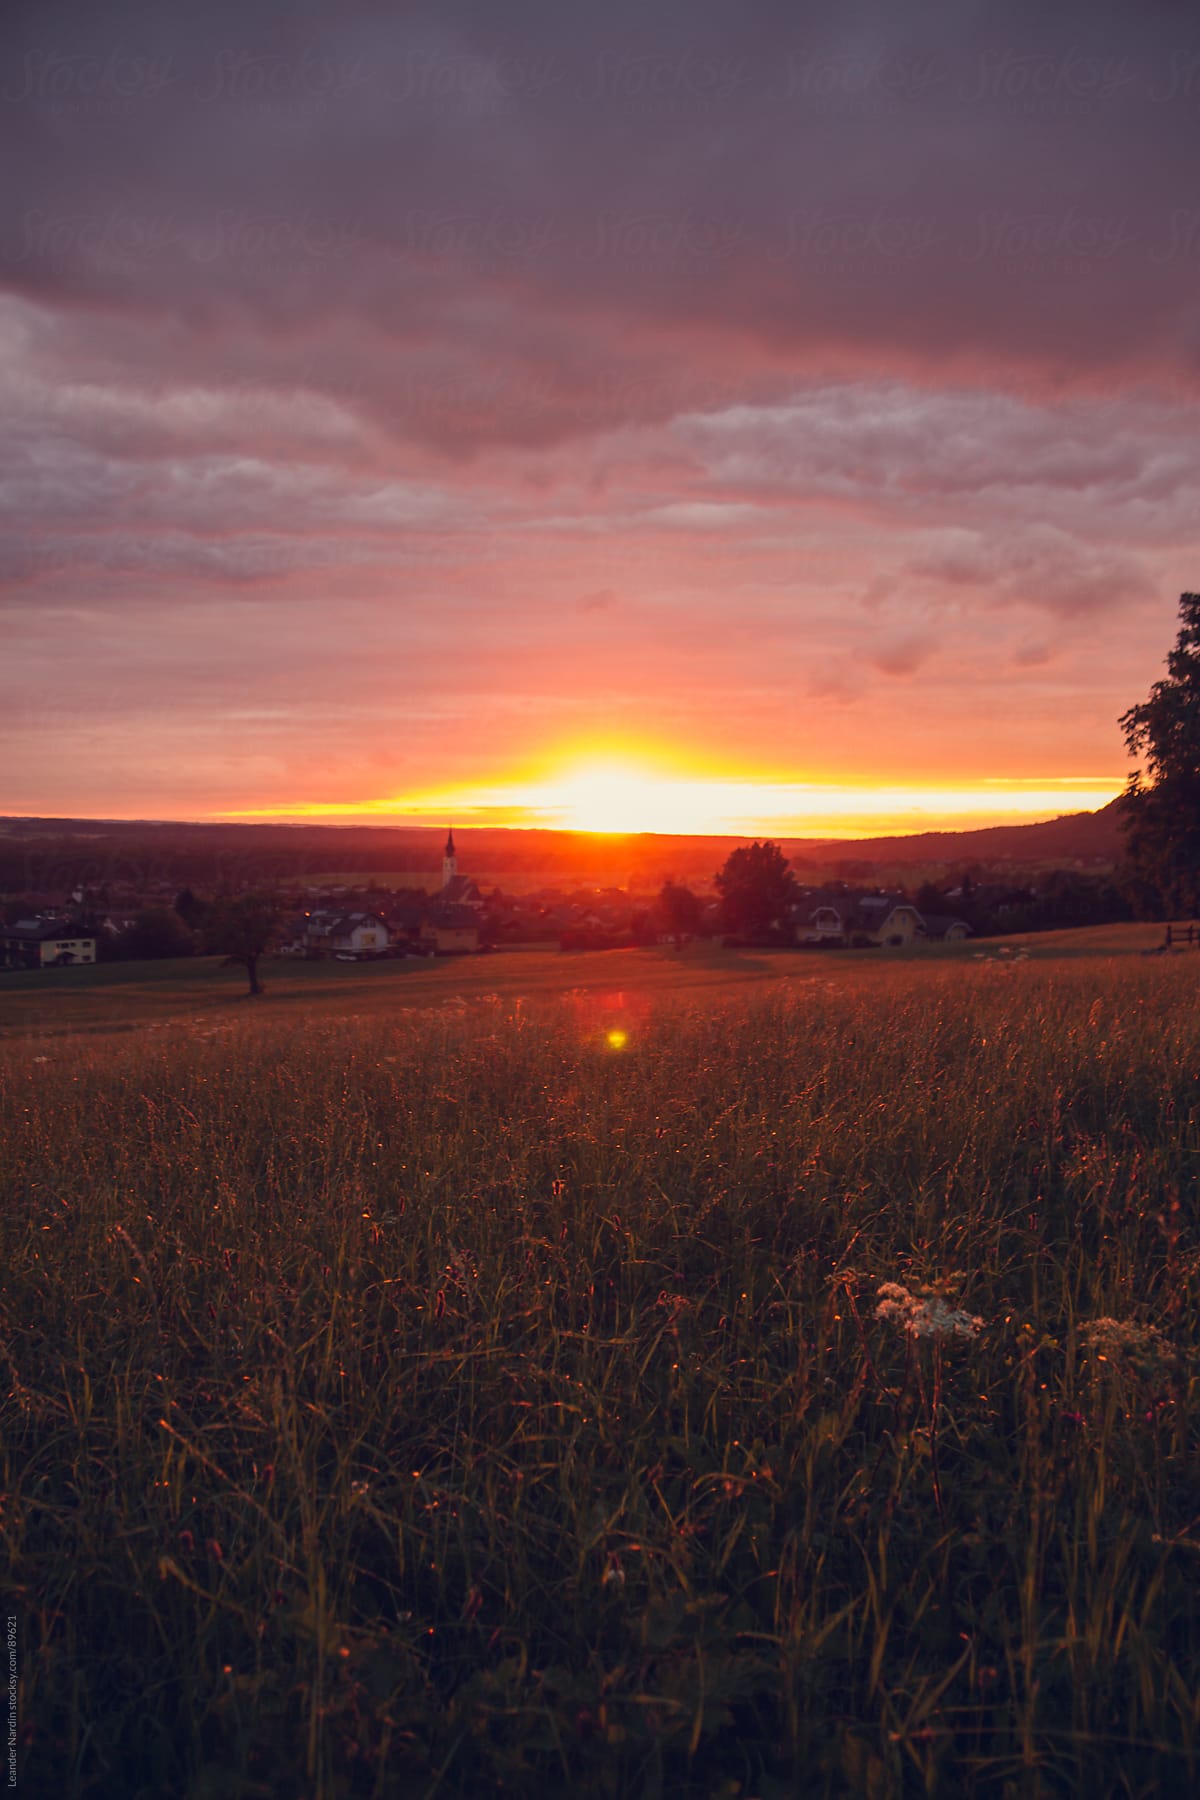 Sunset over a small village with grassy landscape